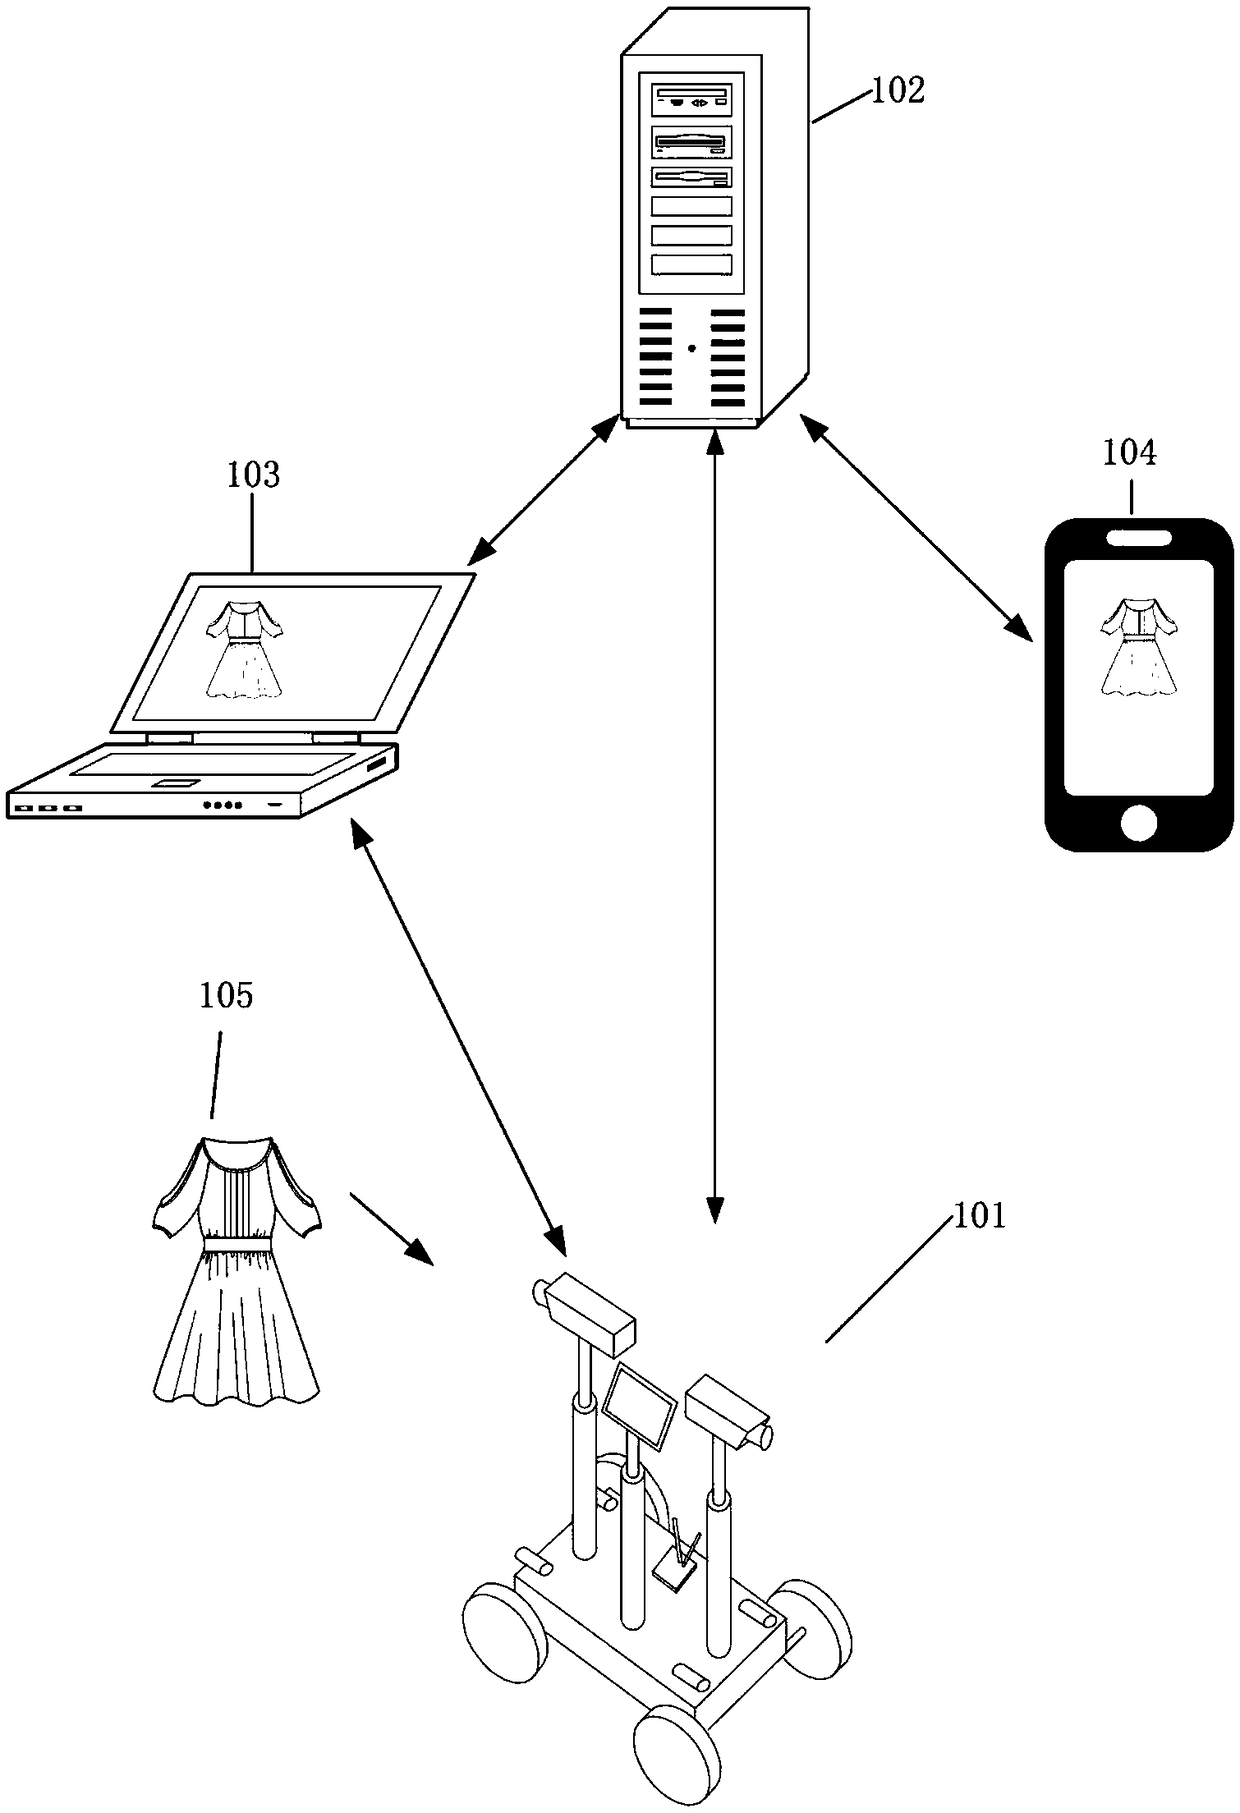 A remote robot assisted online shopping system and method